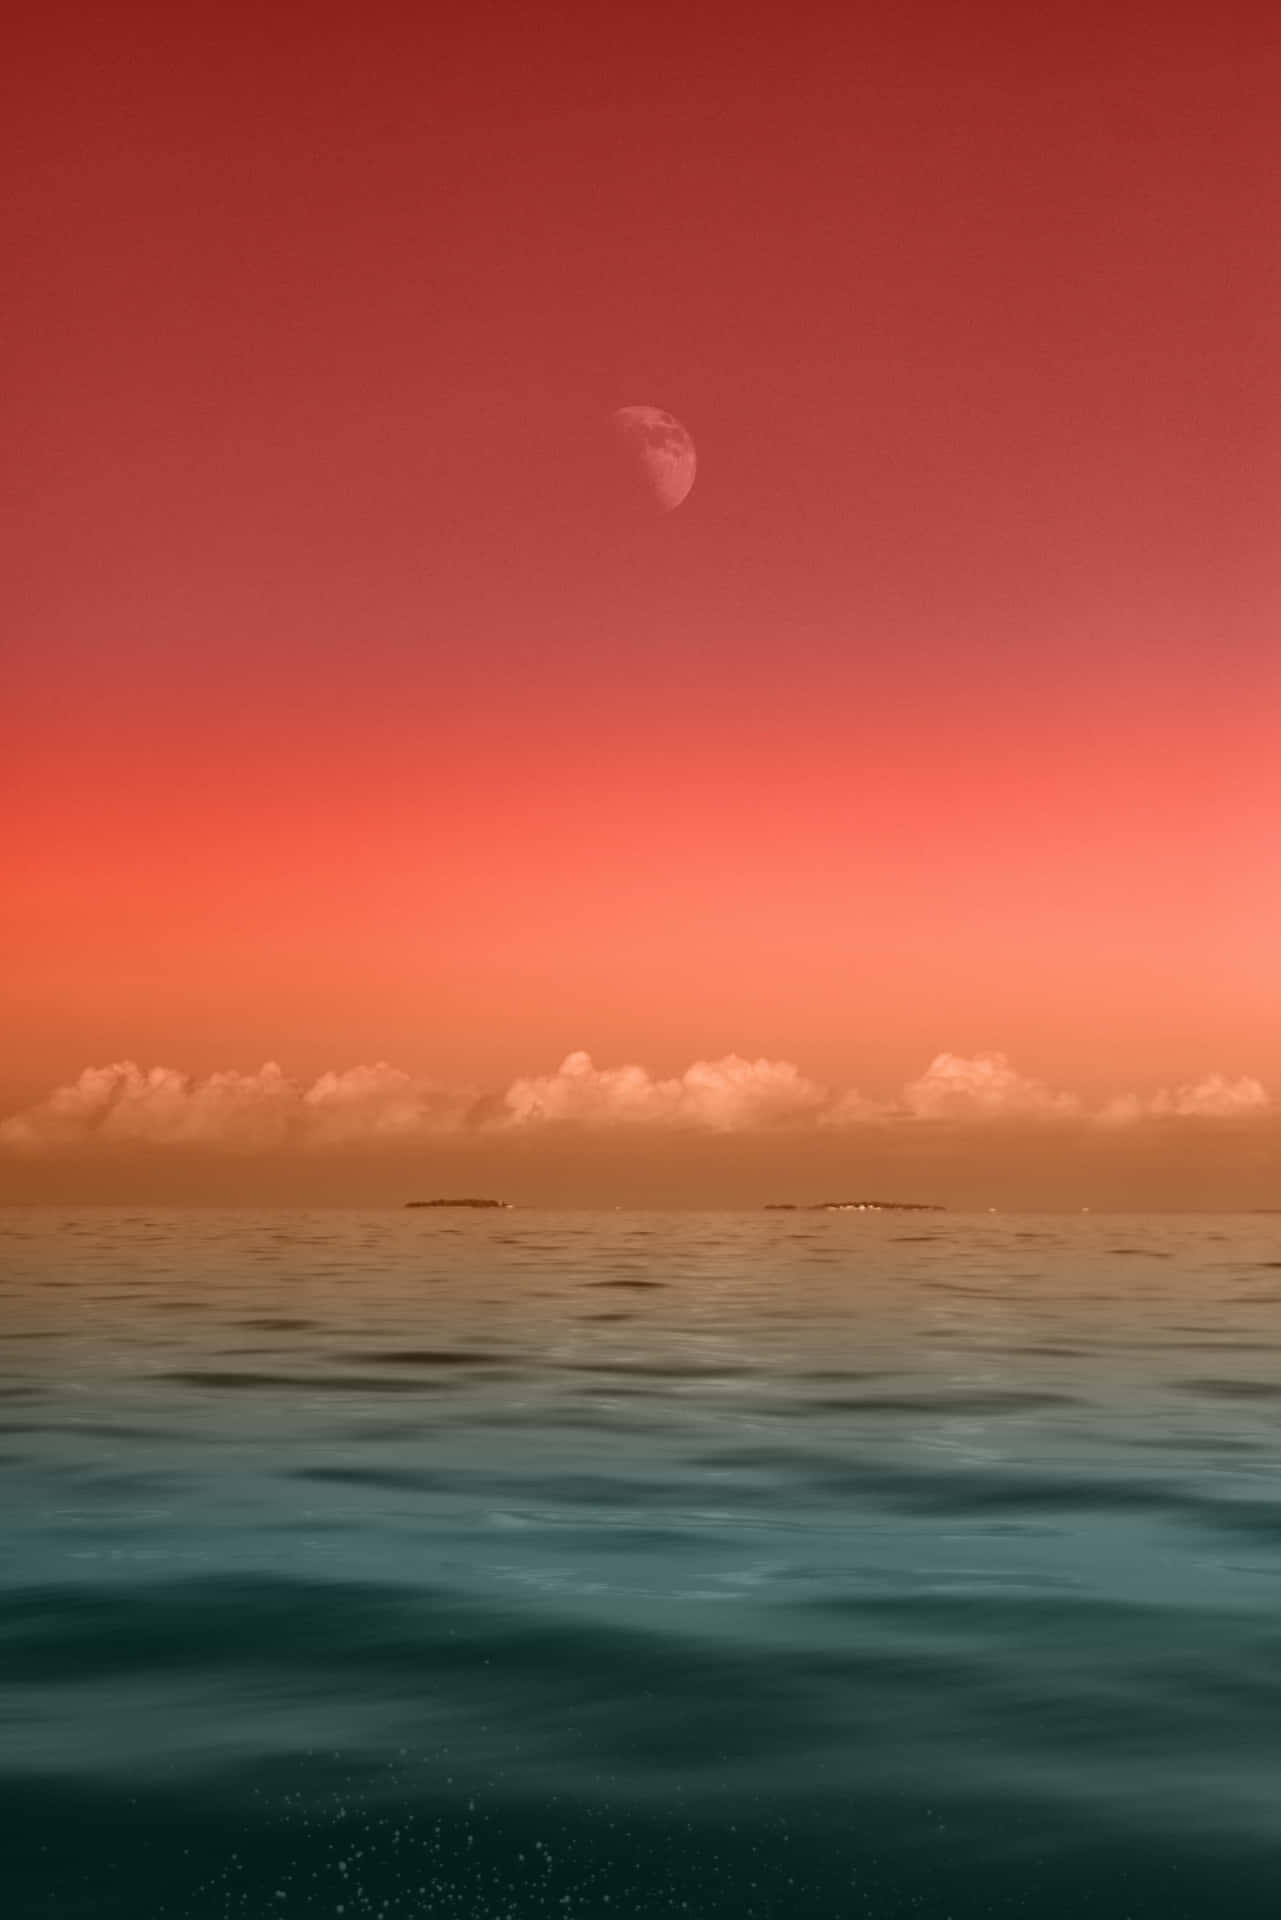 Dark Green Sea And Red Sky Gradient Background